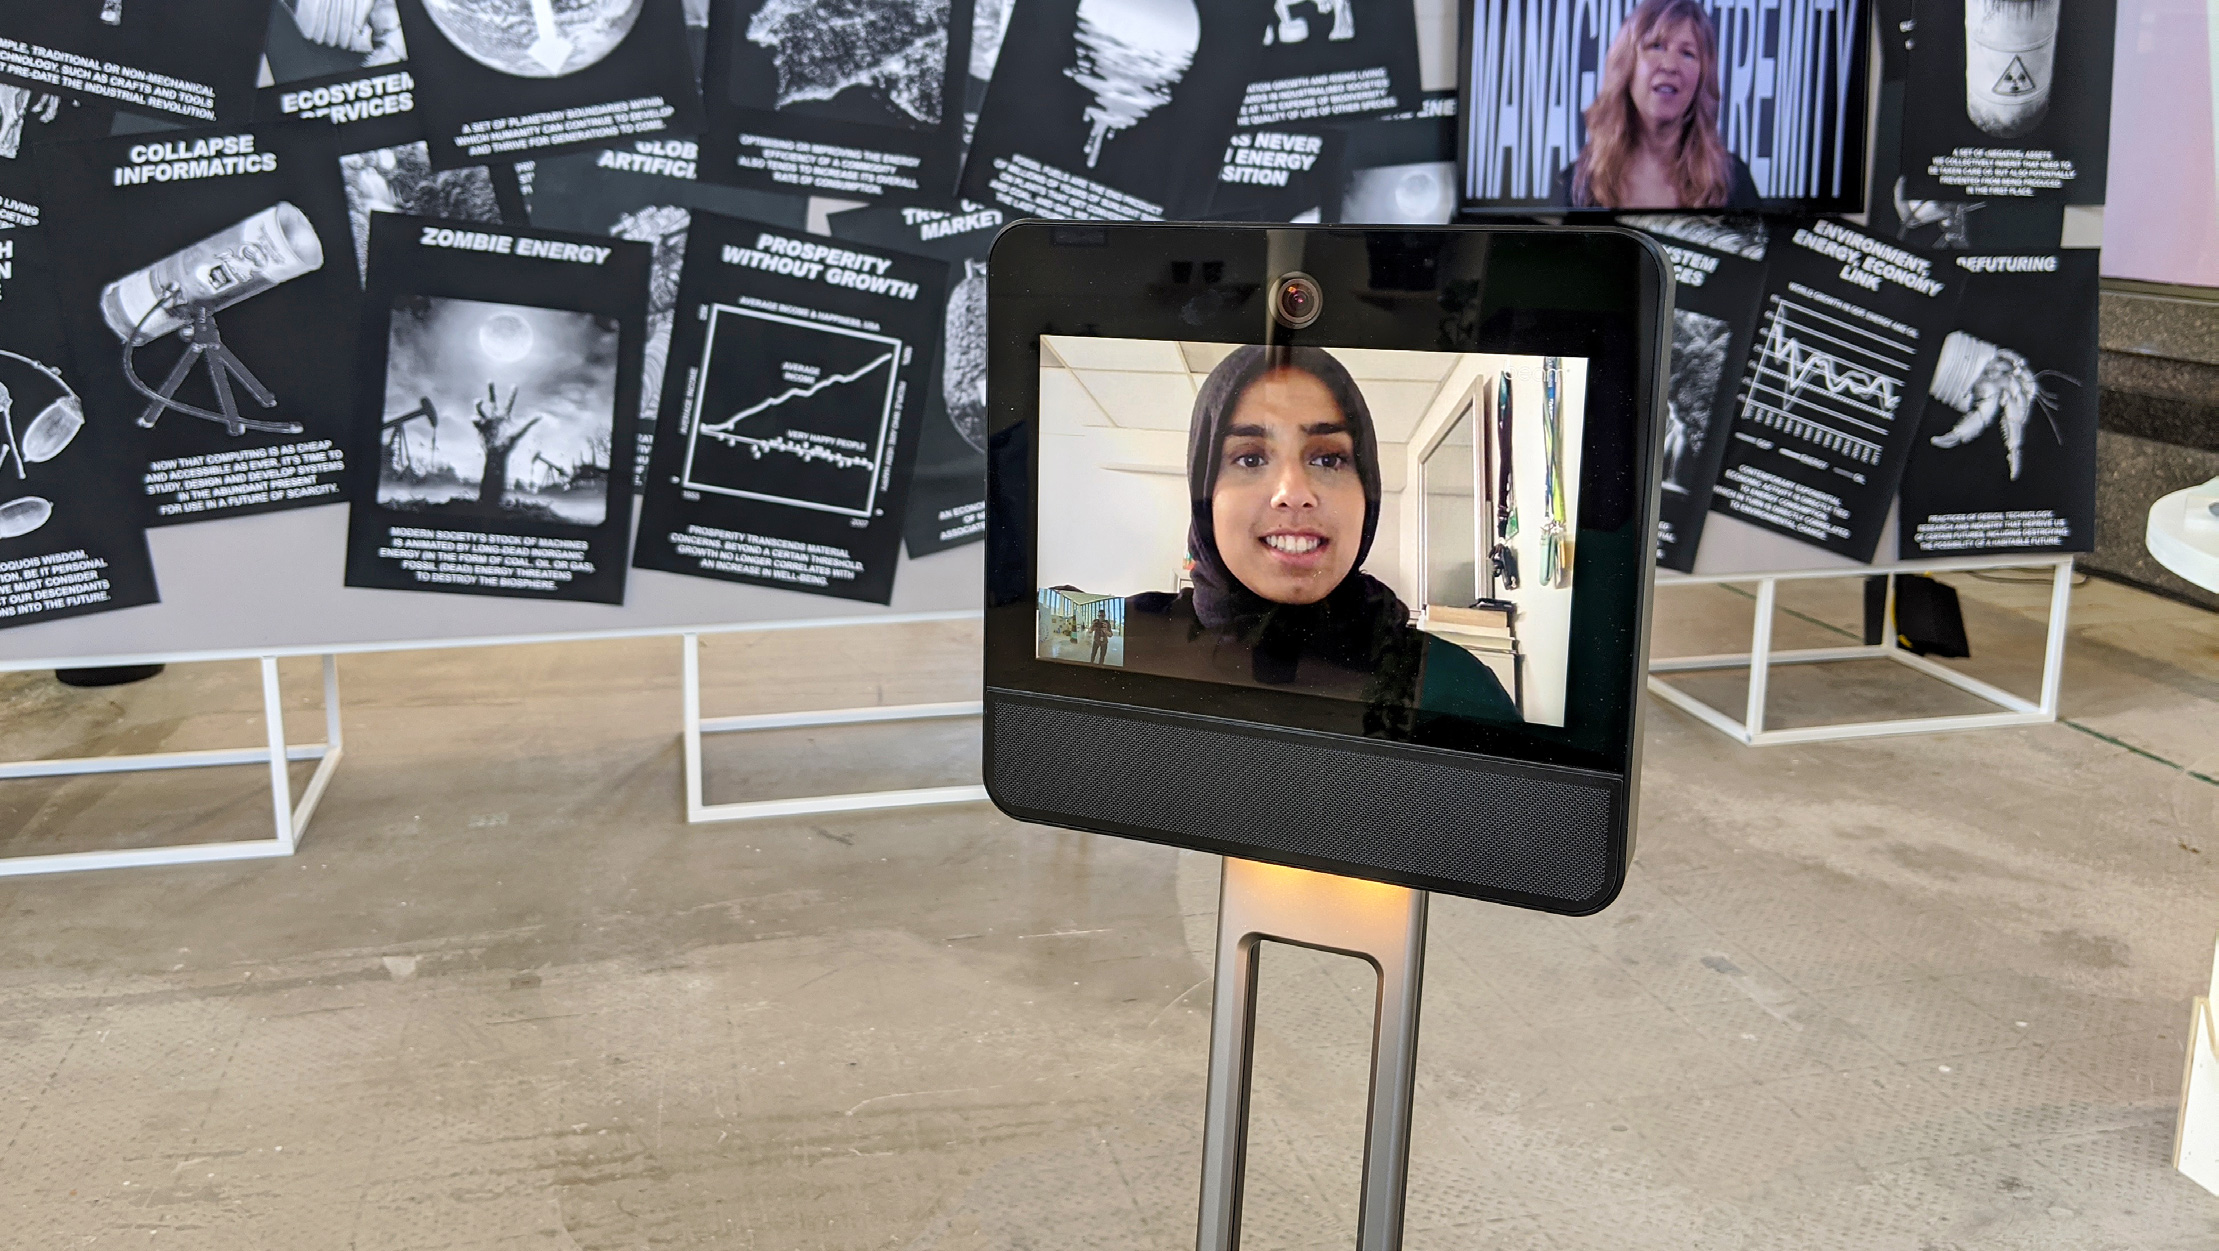 CoLaborator on the screen of a telepresence robot in Future Present exhibition.